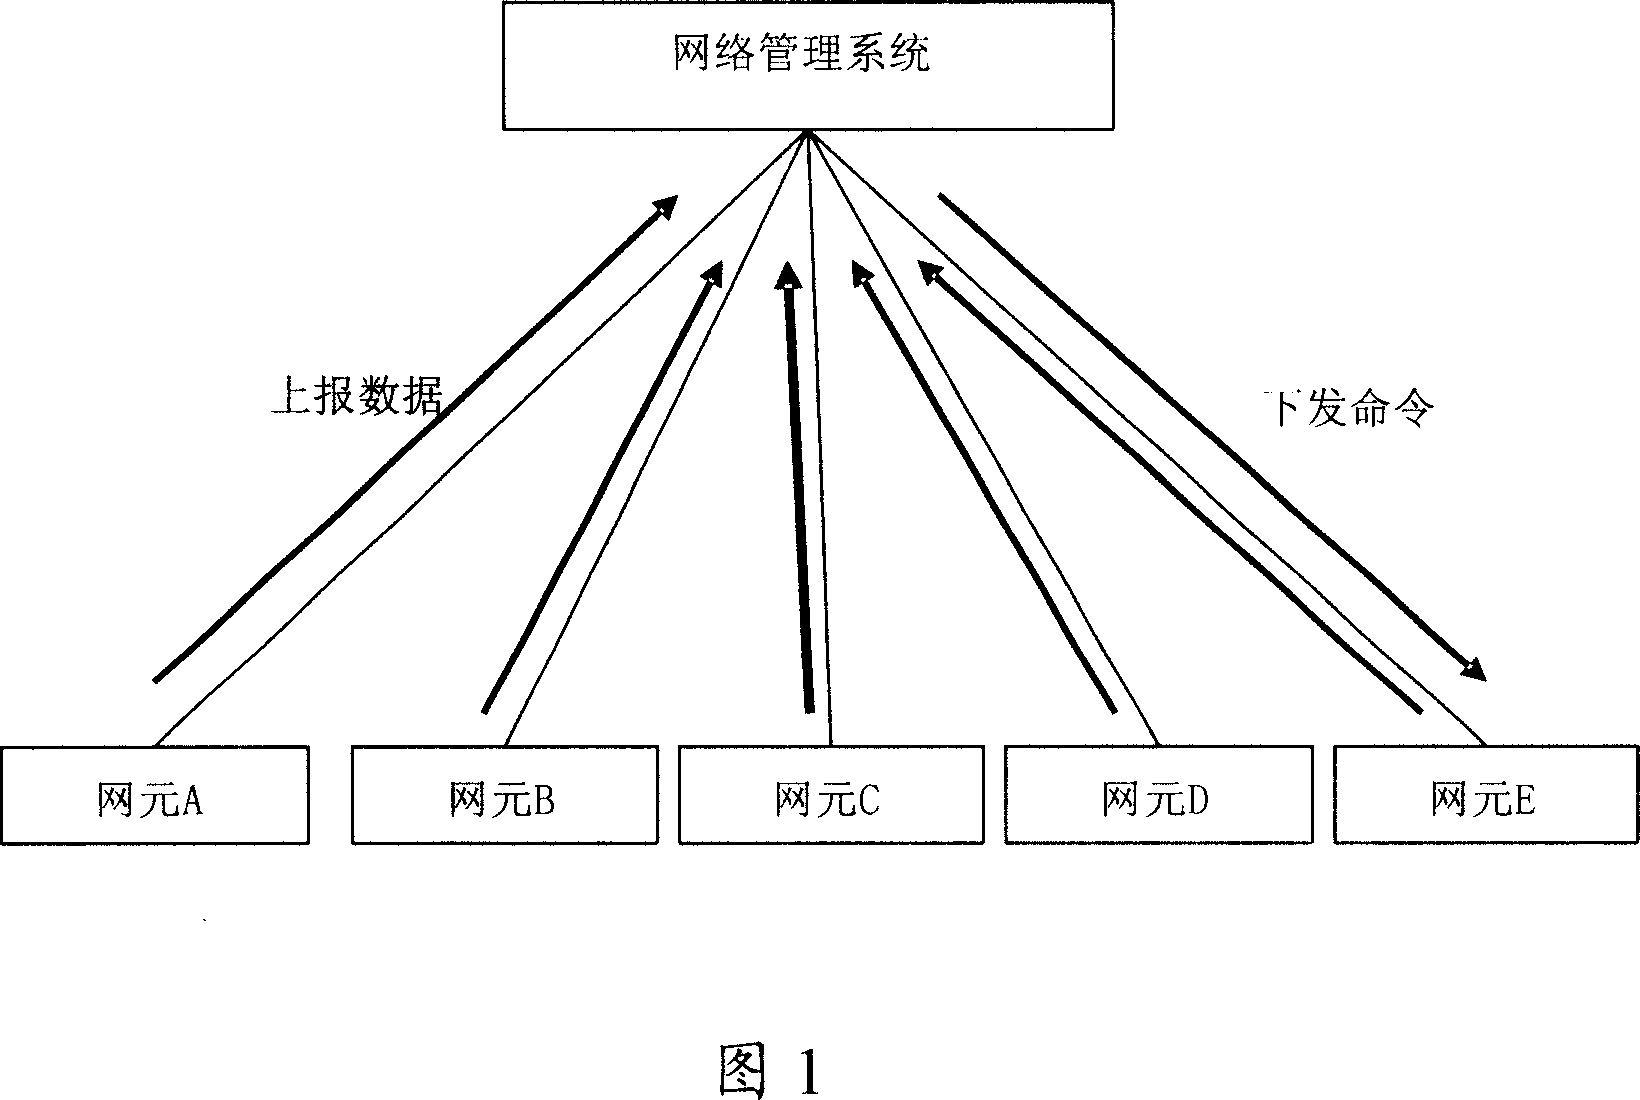 Network element management method and system